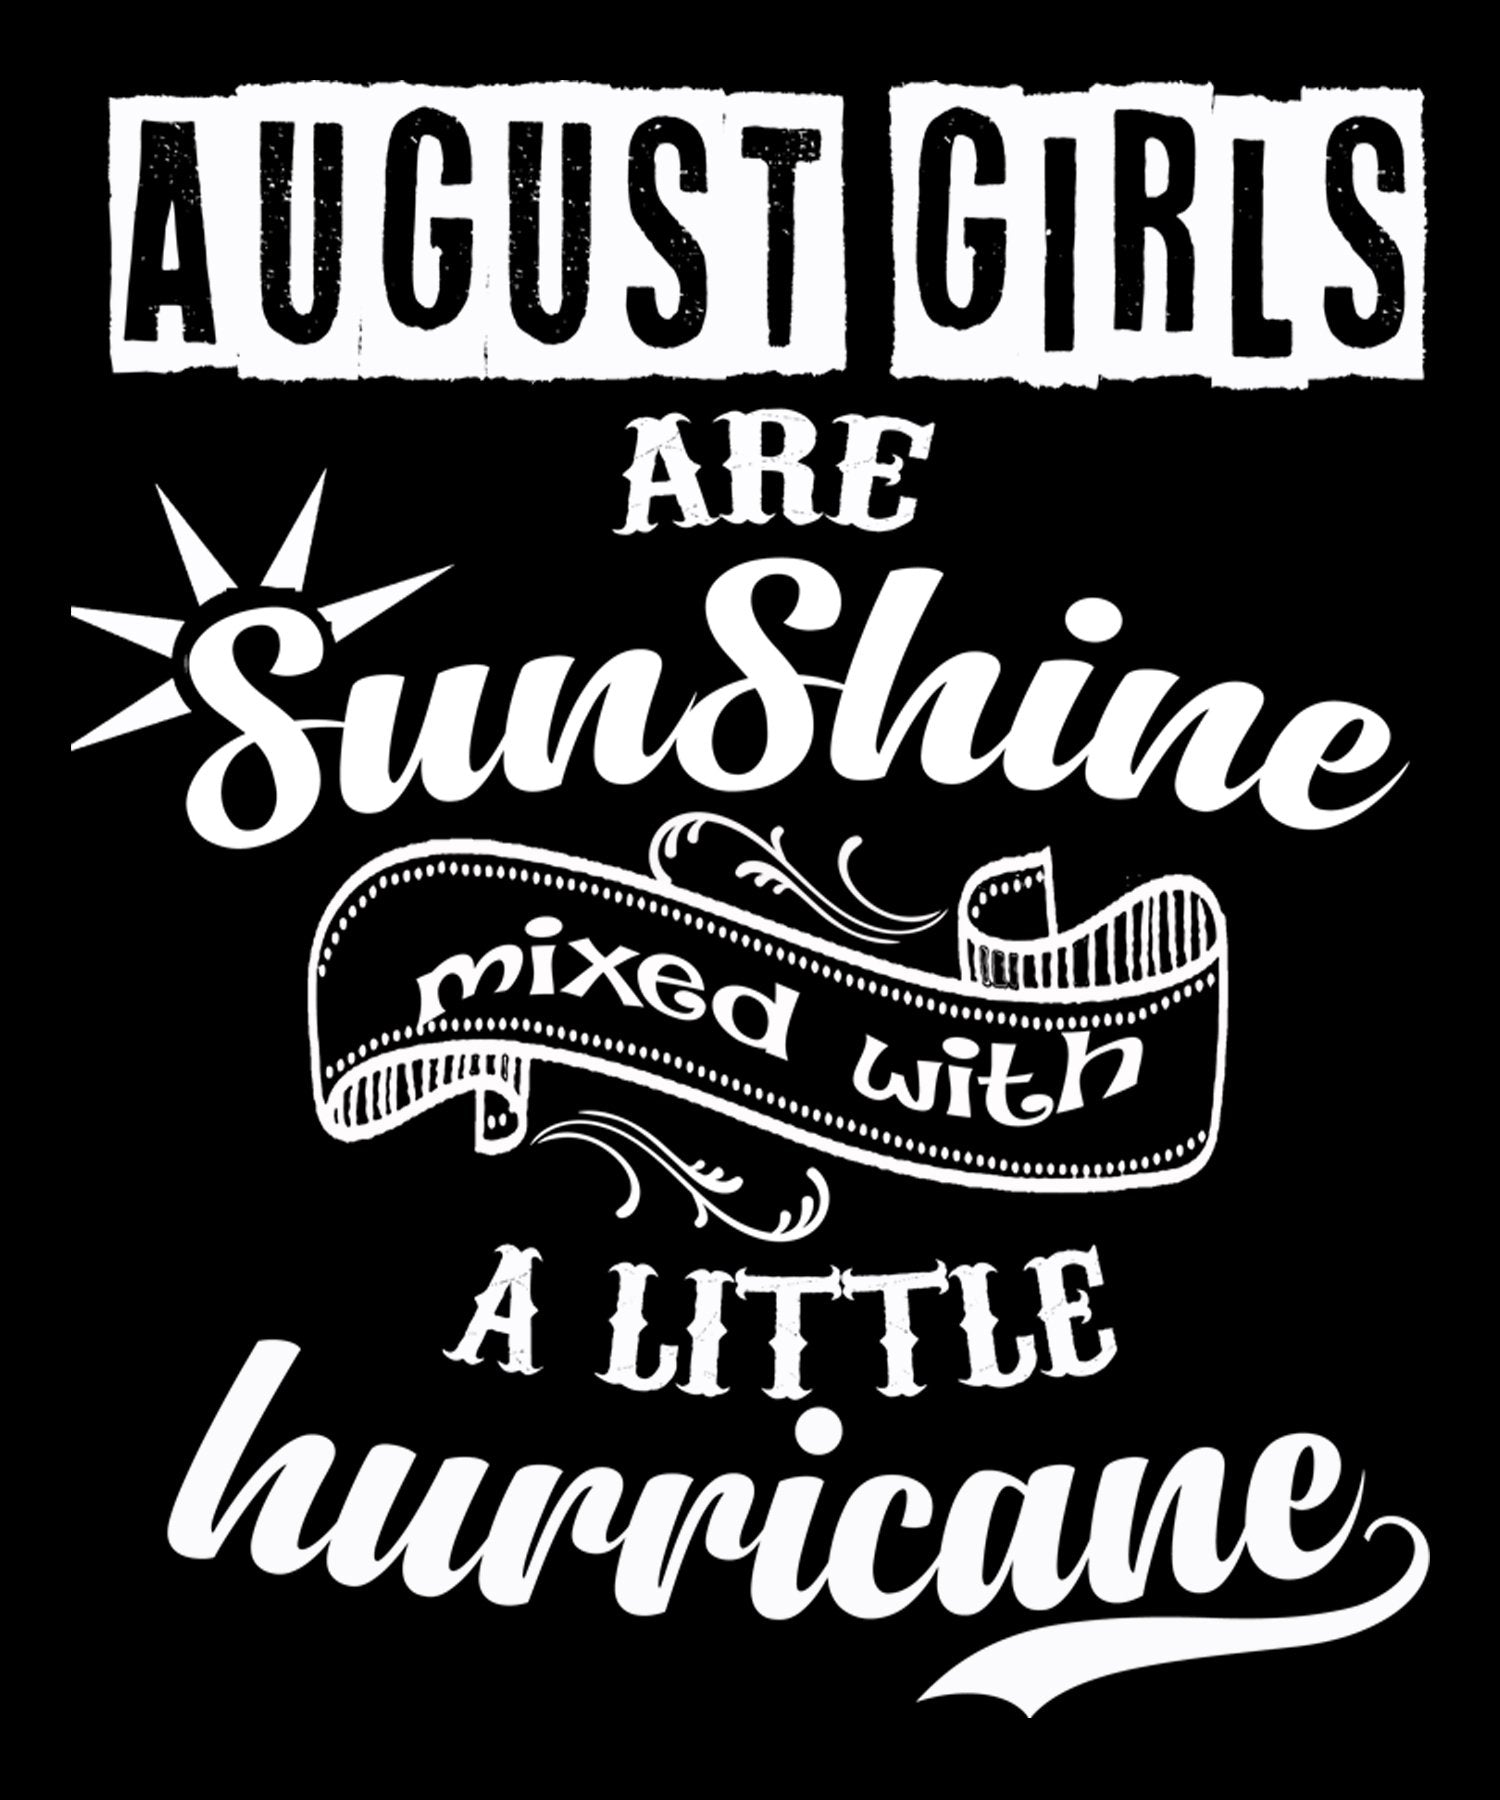 "August Girls Are Sunshine Mixed With Hurricane"